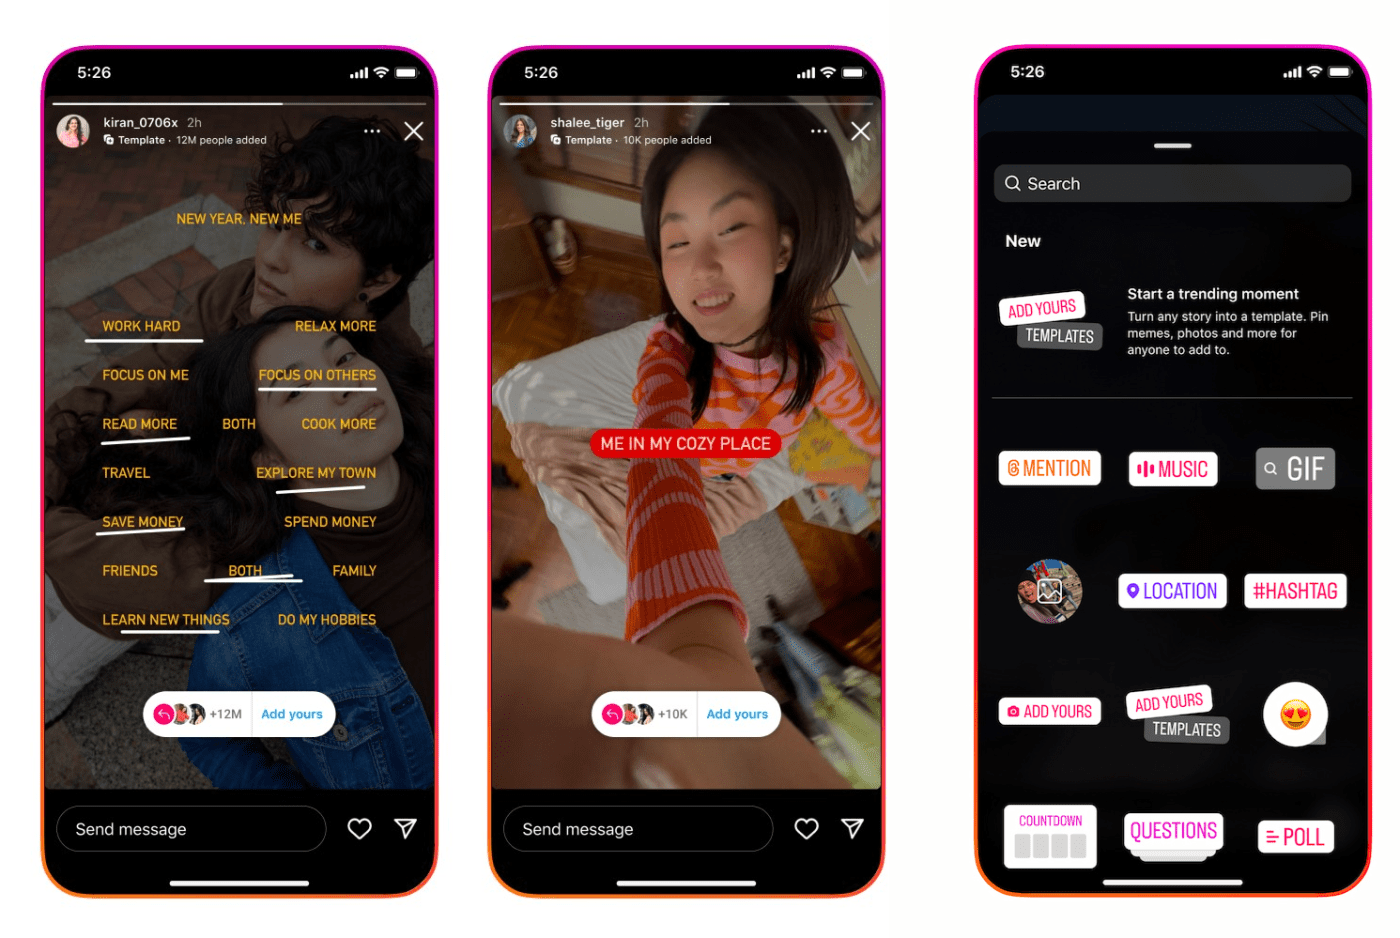 Instagram rolls out new customizable Story templates